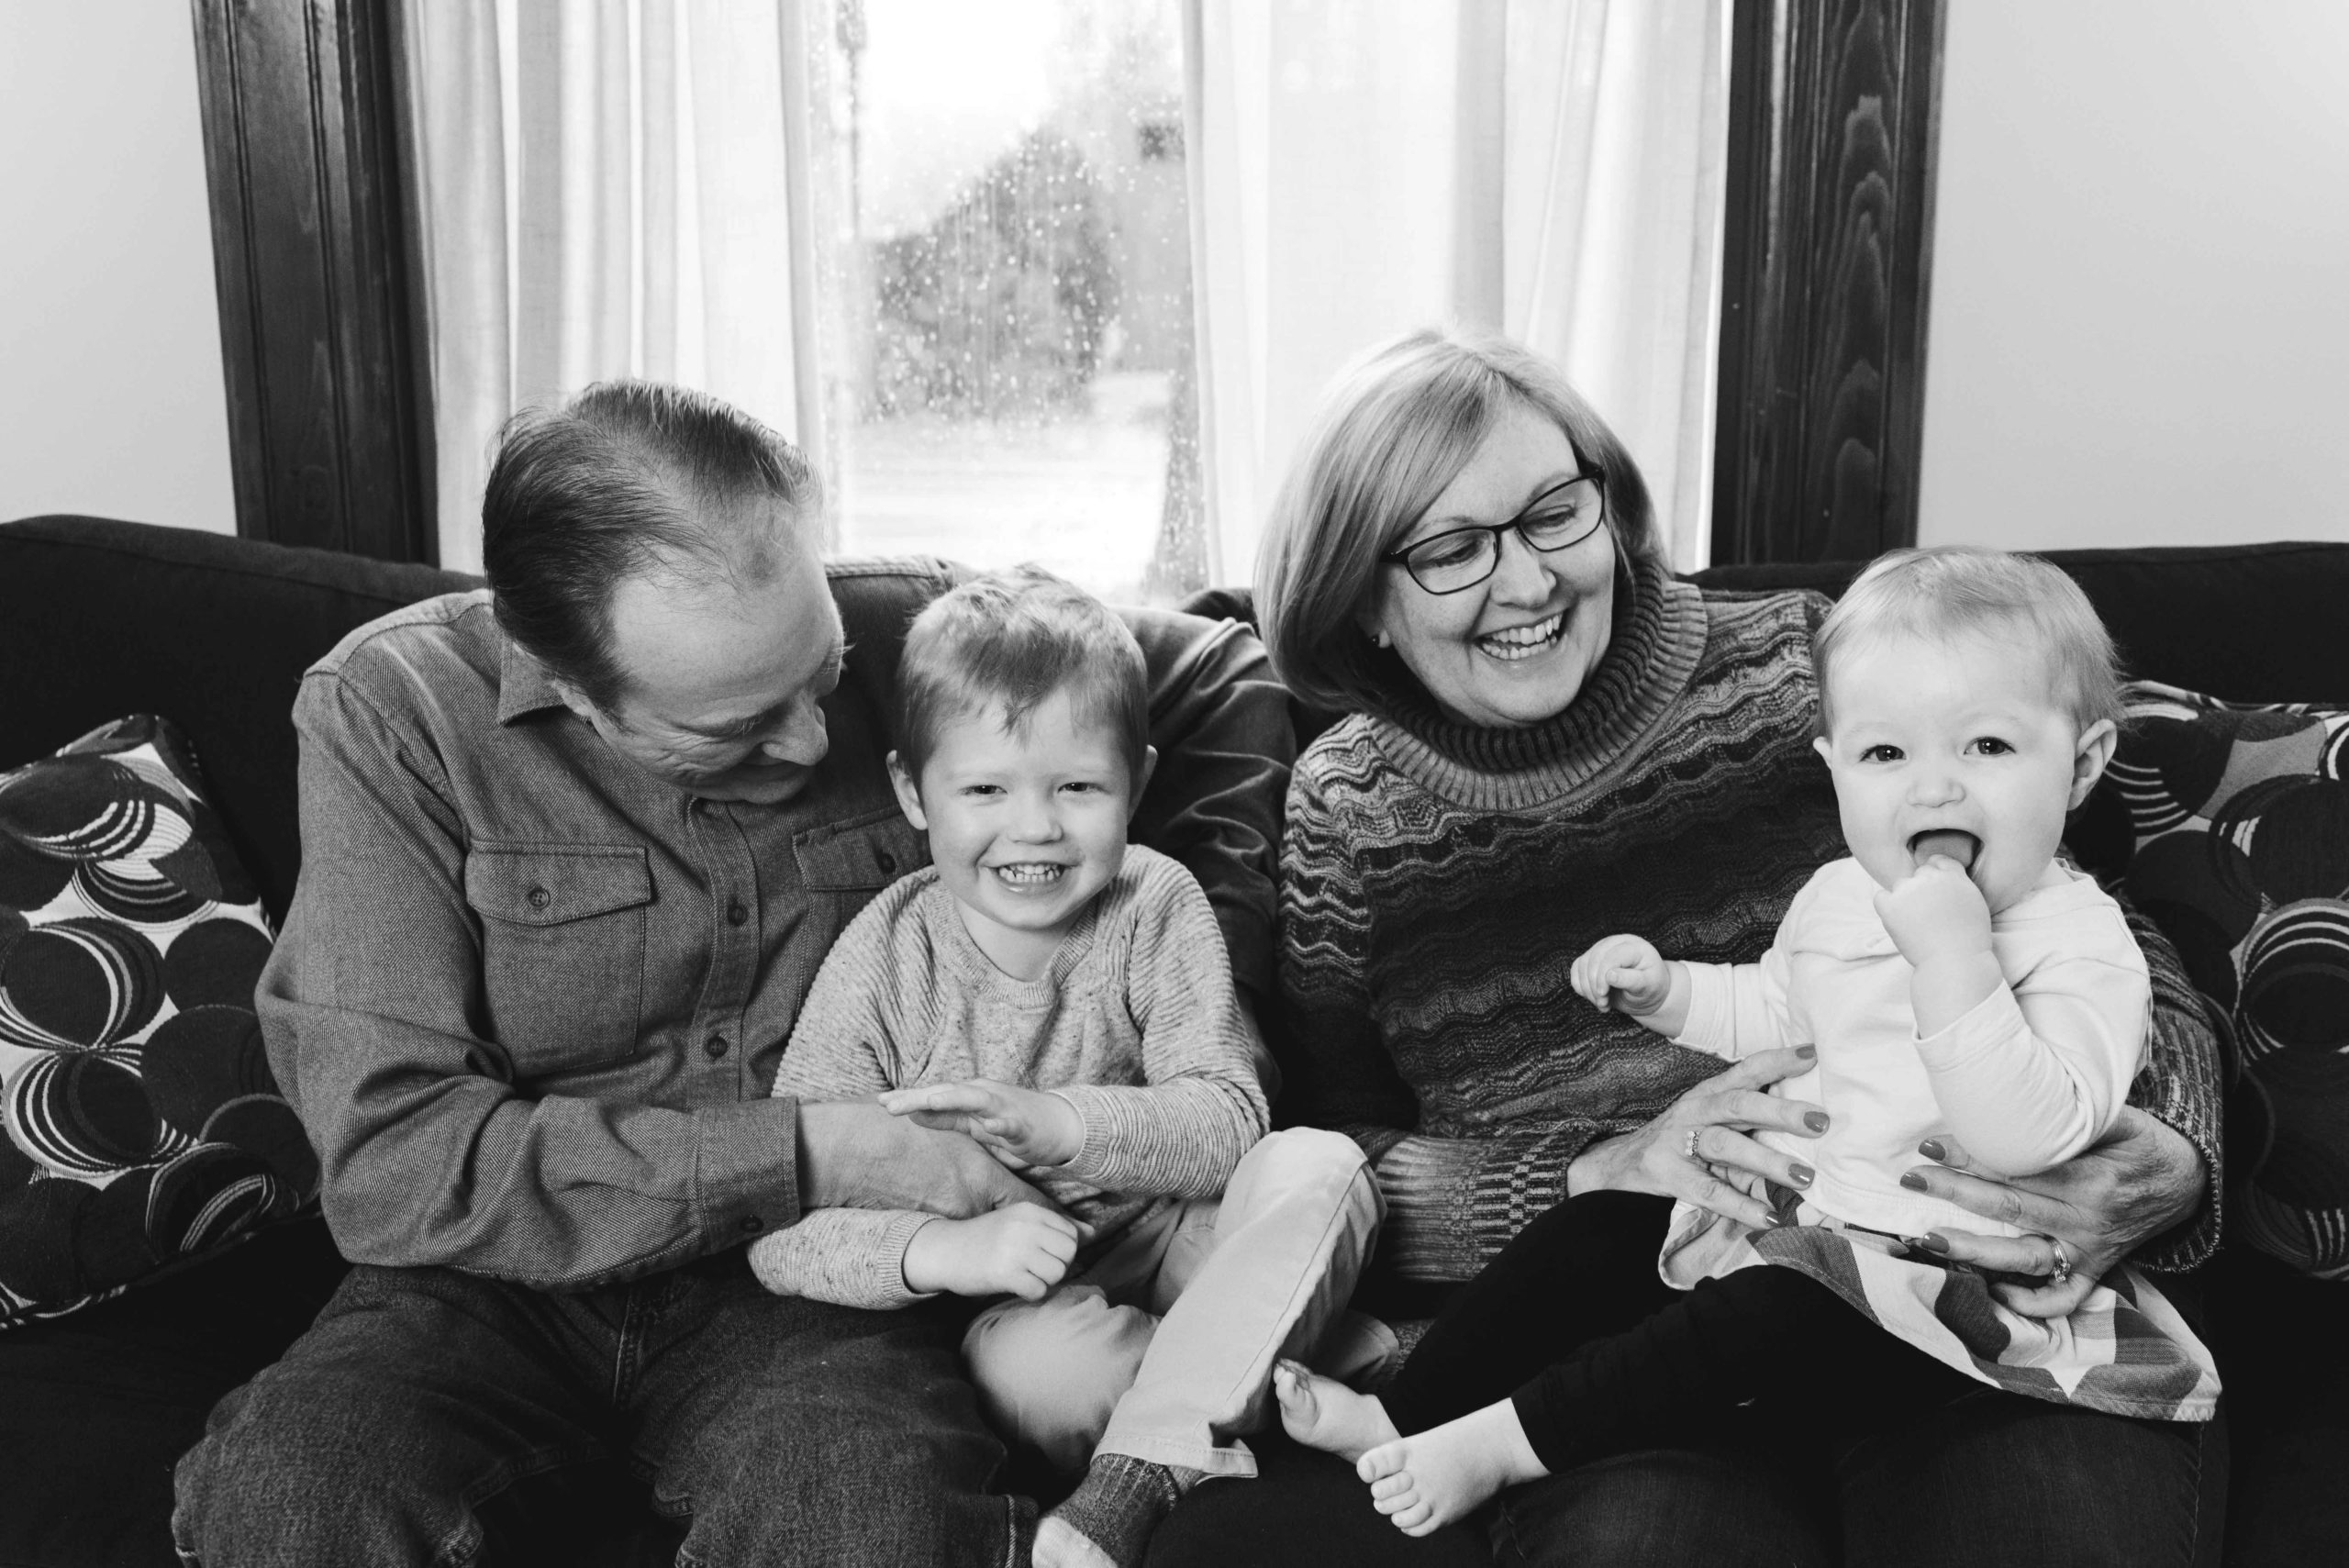 grandparents cuddling with grandkids on the couch in black and white